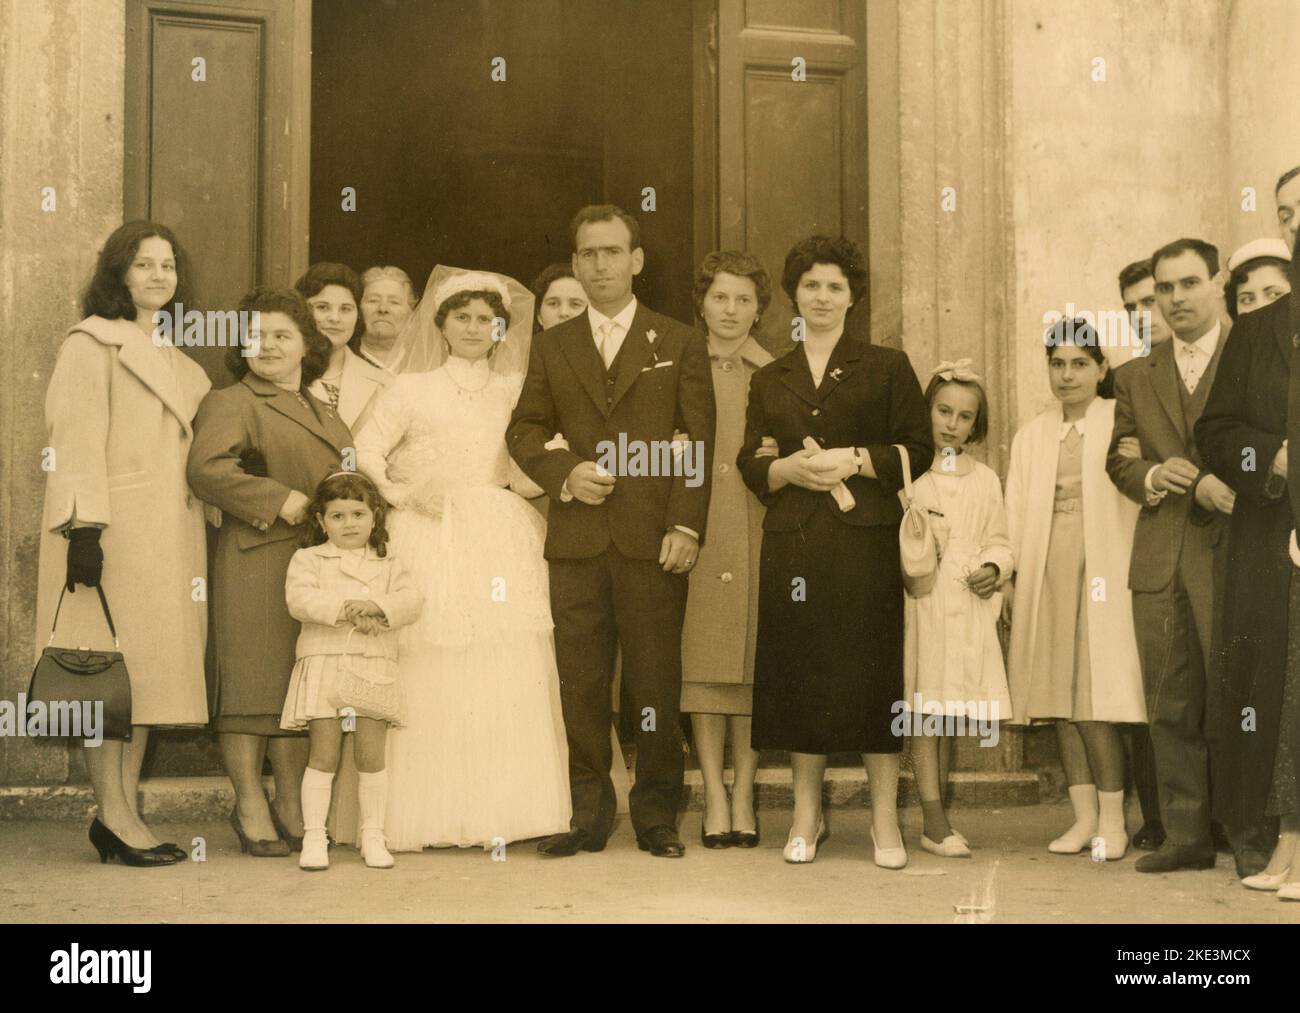 Wedding in a village in central Italy: The Bride and the Groom just married out of the church with friends and relatives, 1950s Stock Photo